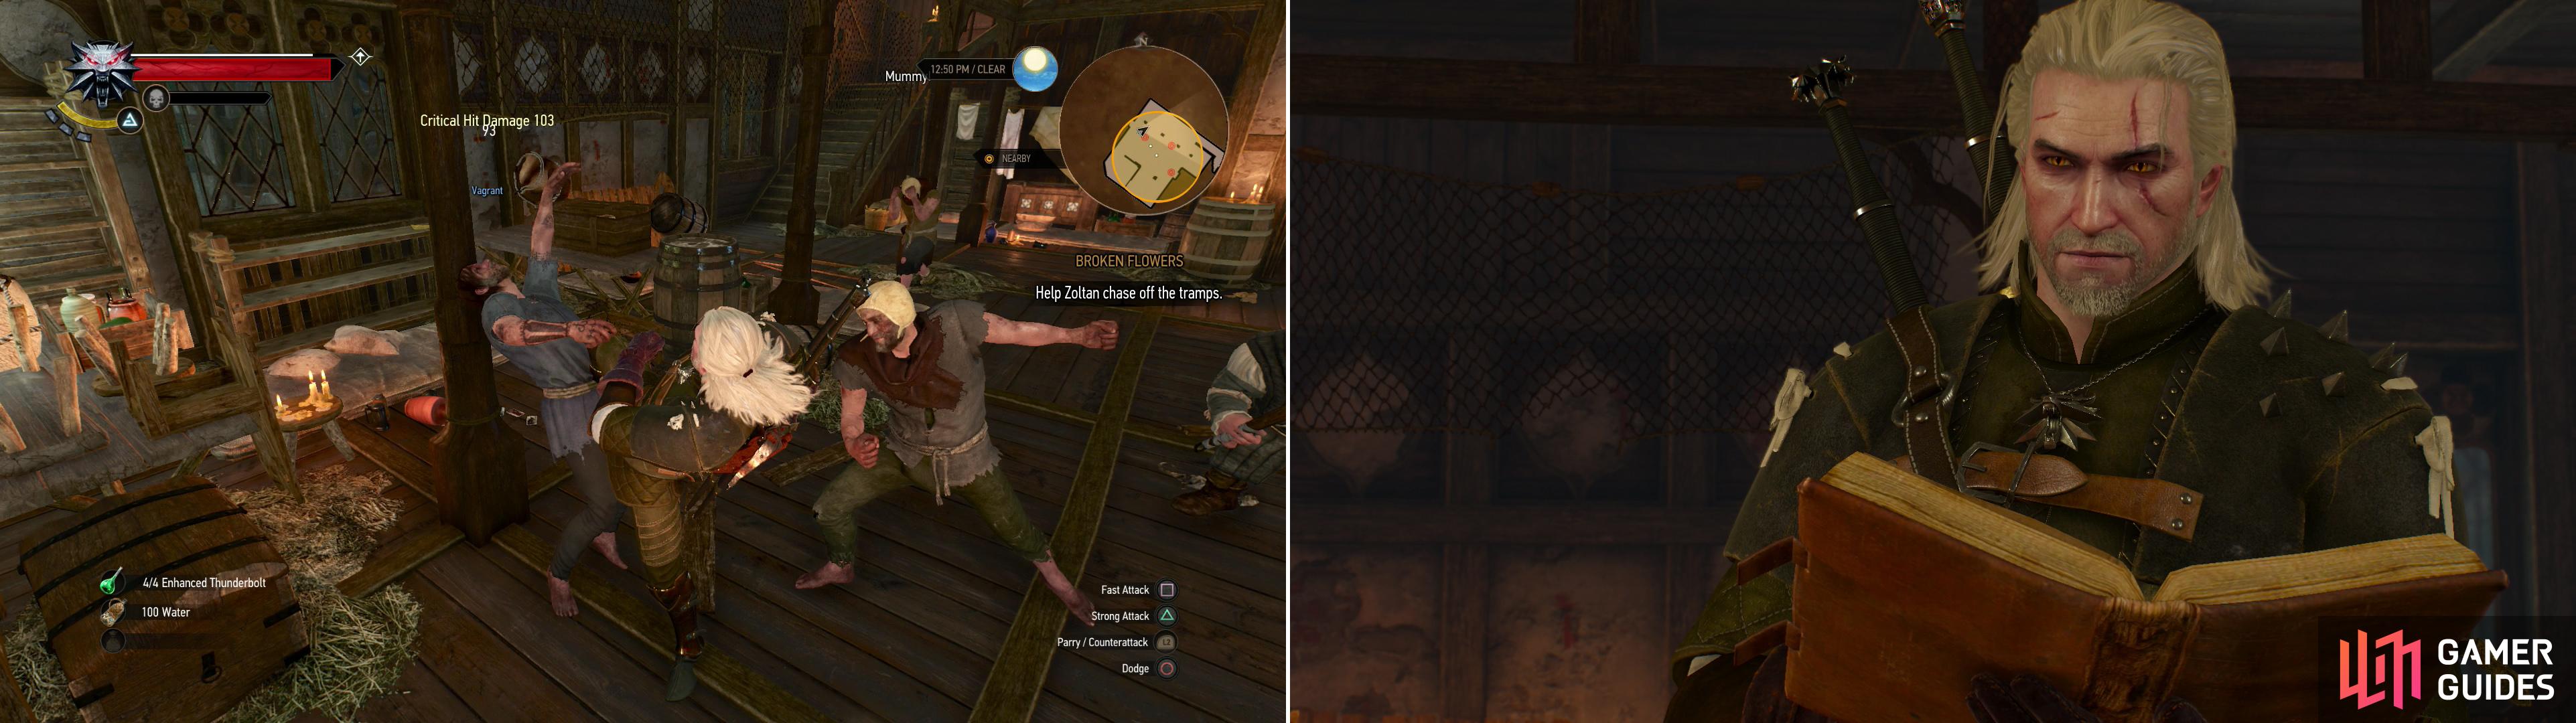 Help Zoltan fight off some squatters (left) then read Dandelion's Planner to find out where he may have gone (right).